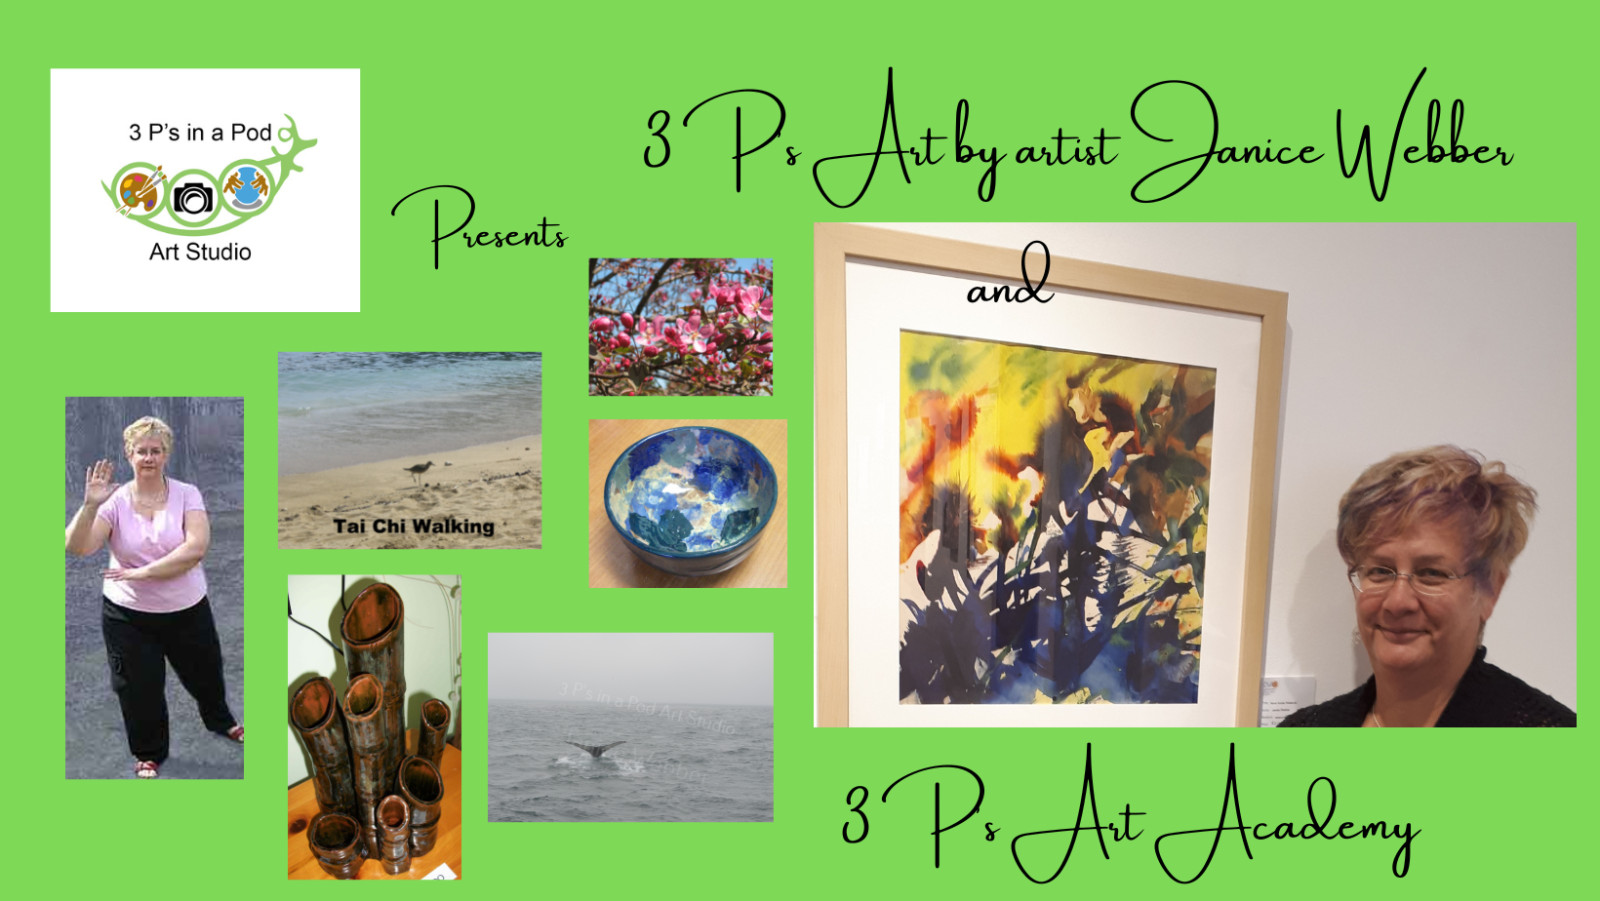 What's new at 3 P's in a Pod Art Studio - part 3